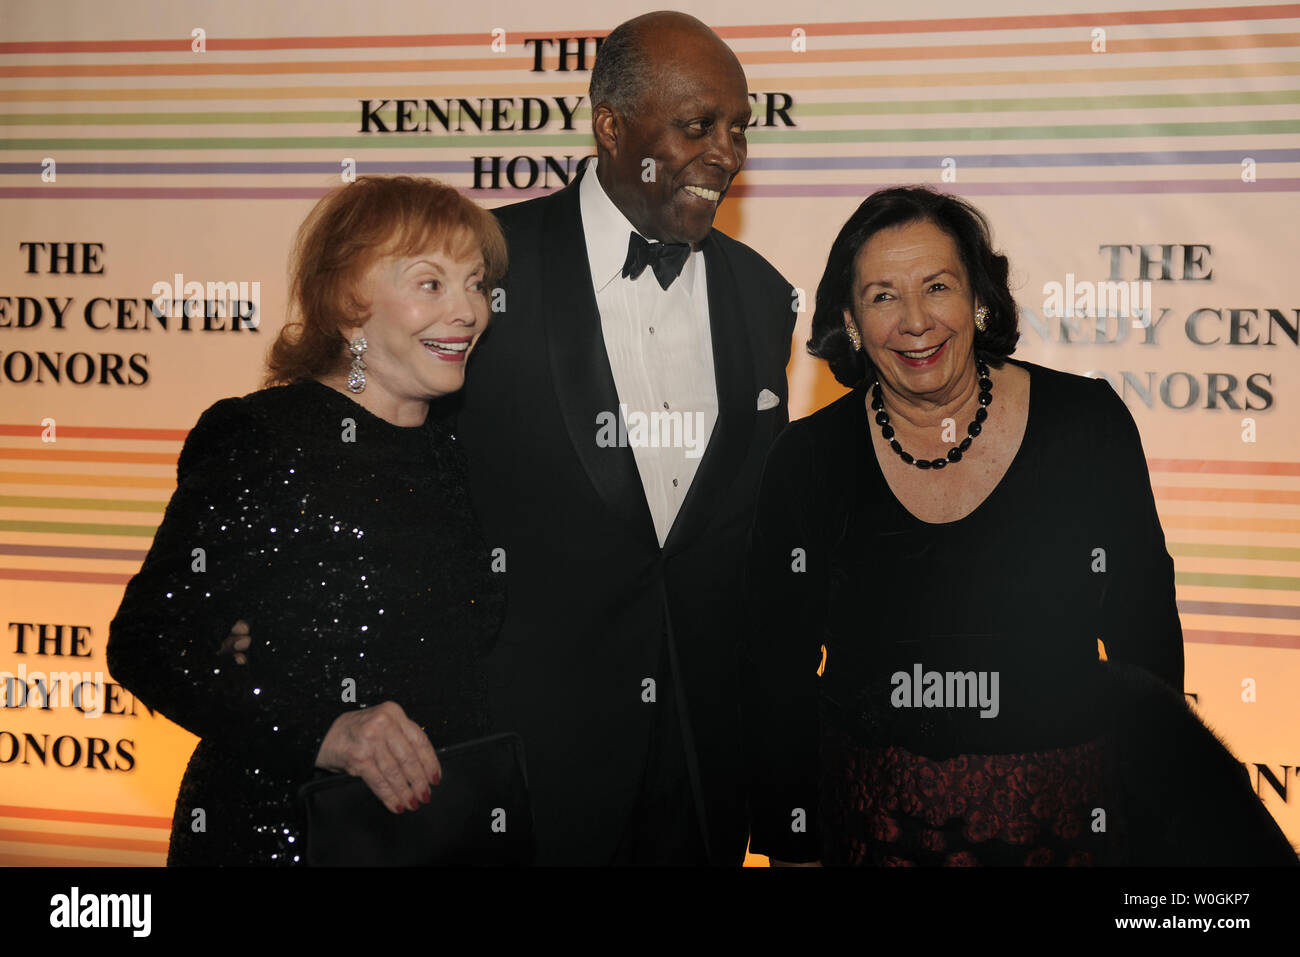 Vernon Jordan (C), his wife Anne (R) and socialite Buffy Cafritz pose for photographers on the red carpet as they arrive at the Kennedy Center for the Performing Arts for a gala evening for the 2011 Kennedy Center Honorees, December 4, 2011, in Washington. The Kennedy Center annually salutes a select group for their contributions to the performance arts in America.     UPI/Mike Theiler Stock Photo